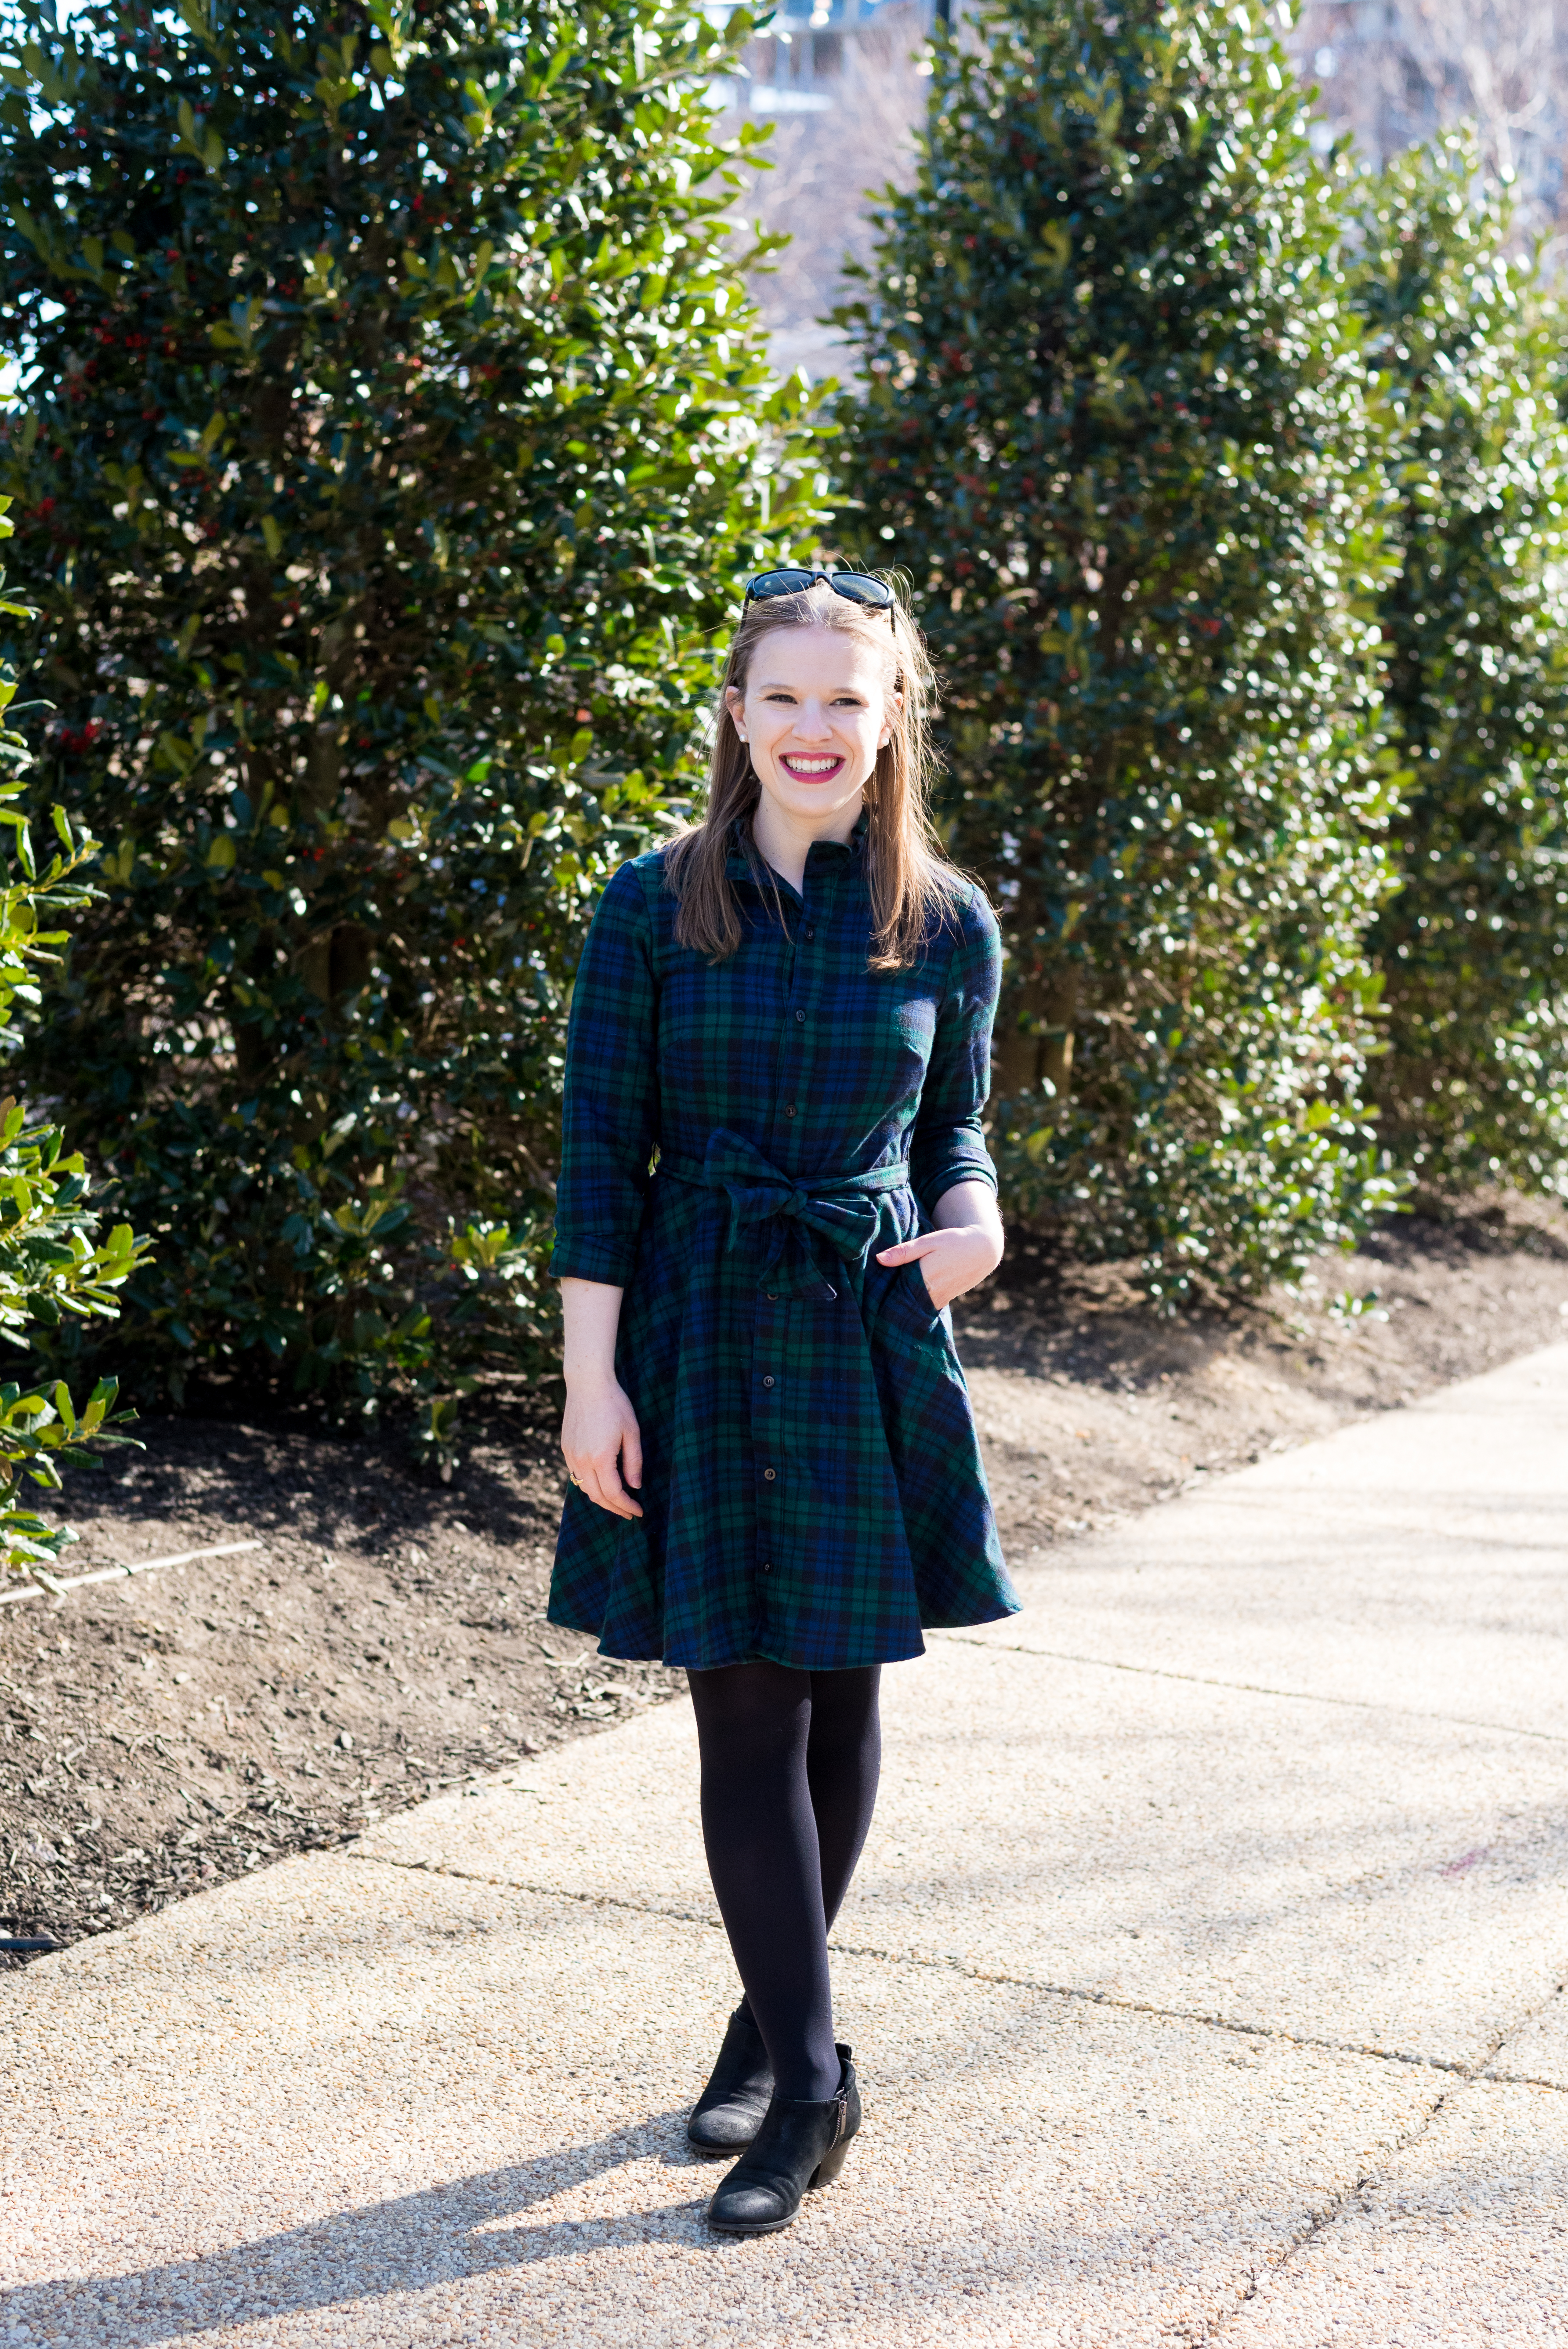 dc woman blogger in plaid dress, Fall Business Casual Outfits | Something Good | A DC Style and Lifestyle Blog on a Budget